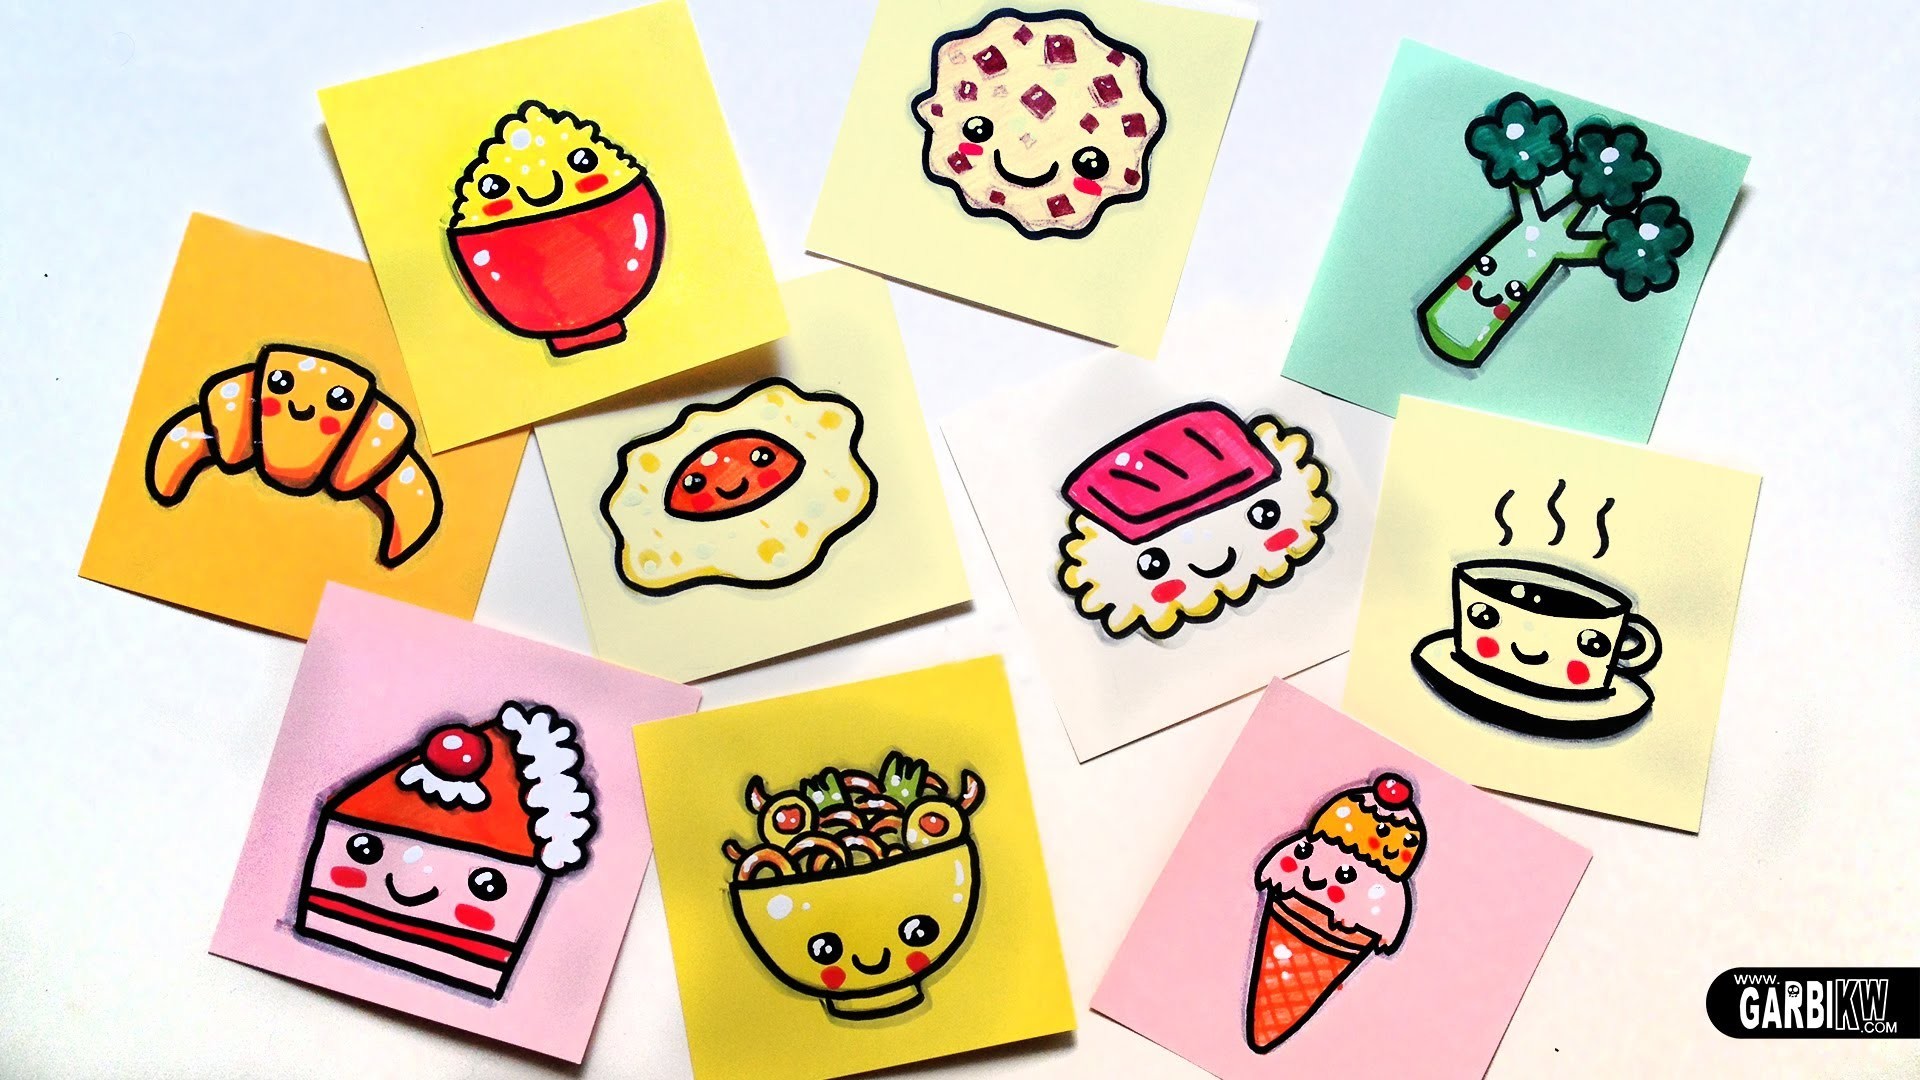 How To Draw Cute Food – news Easy and Kawaii Drawings by Garbi KW – YouTube